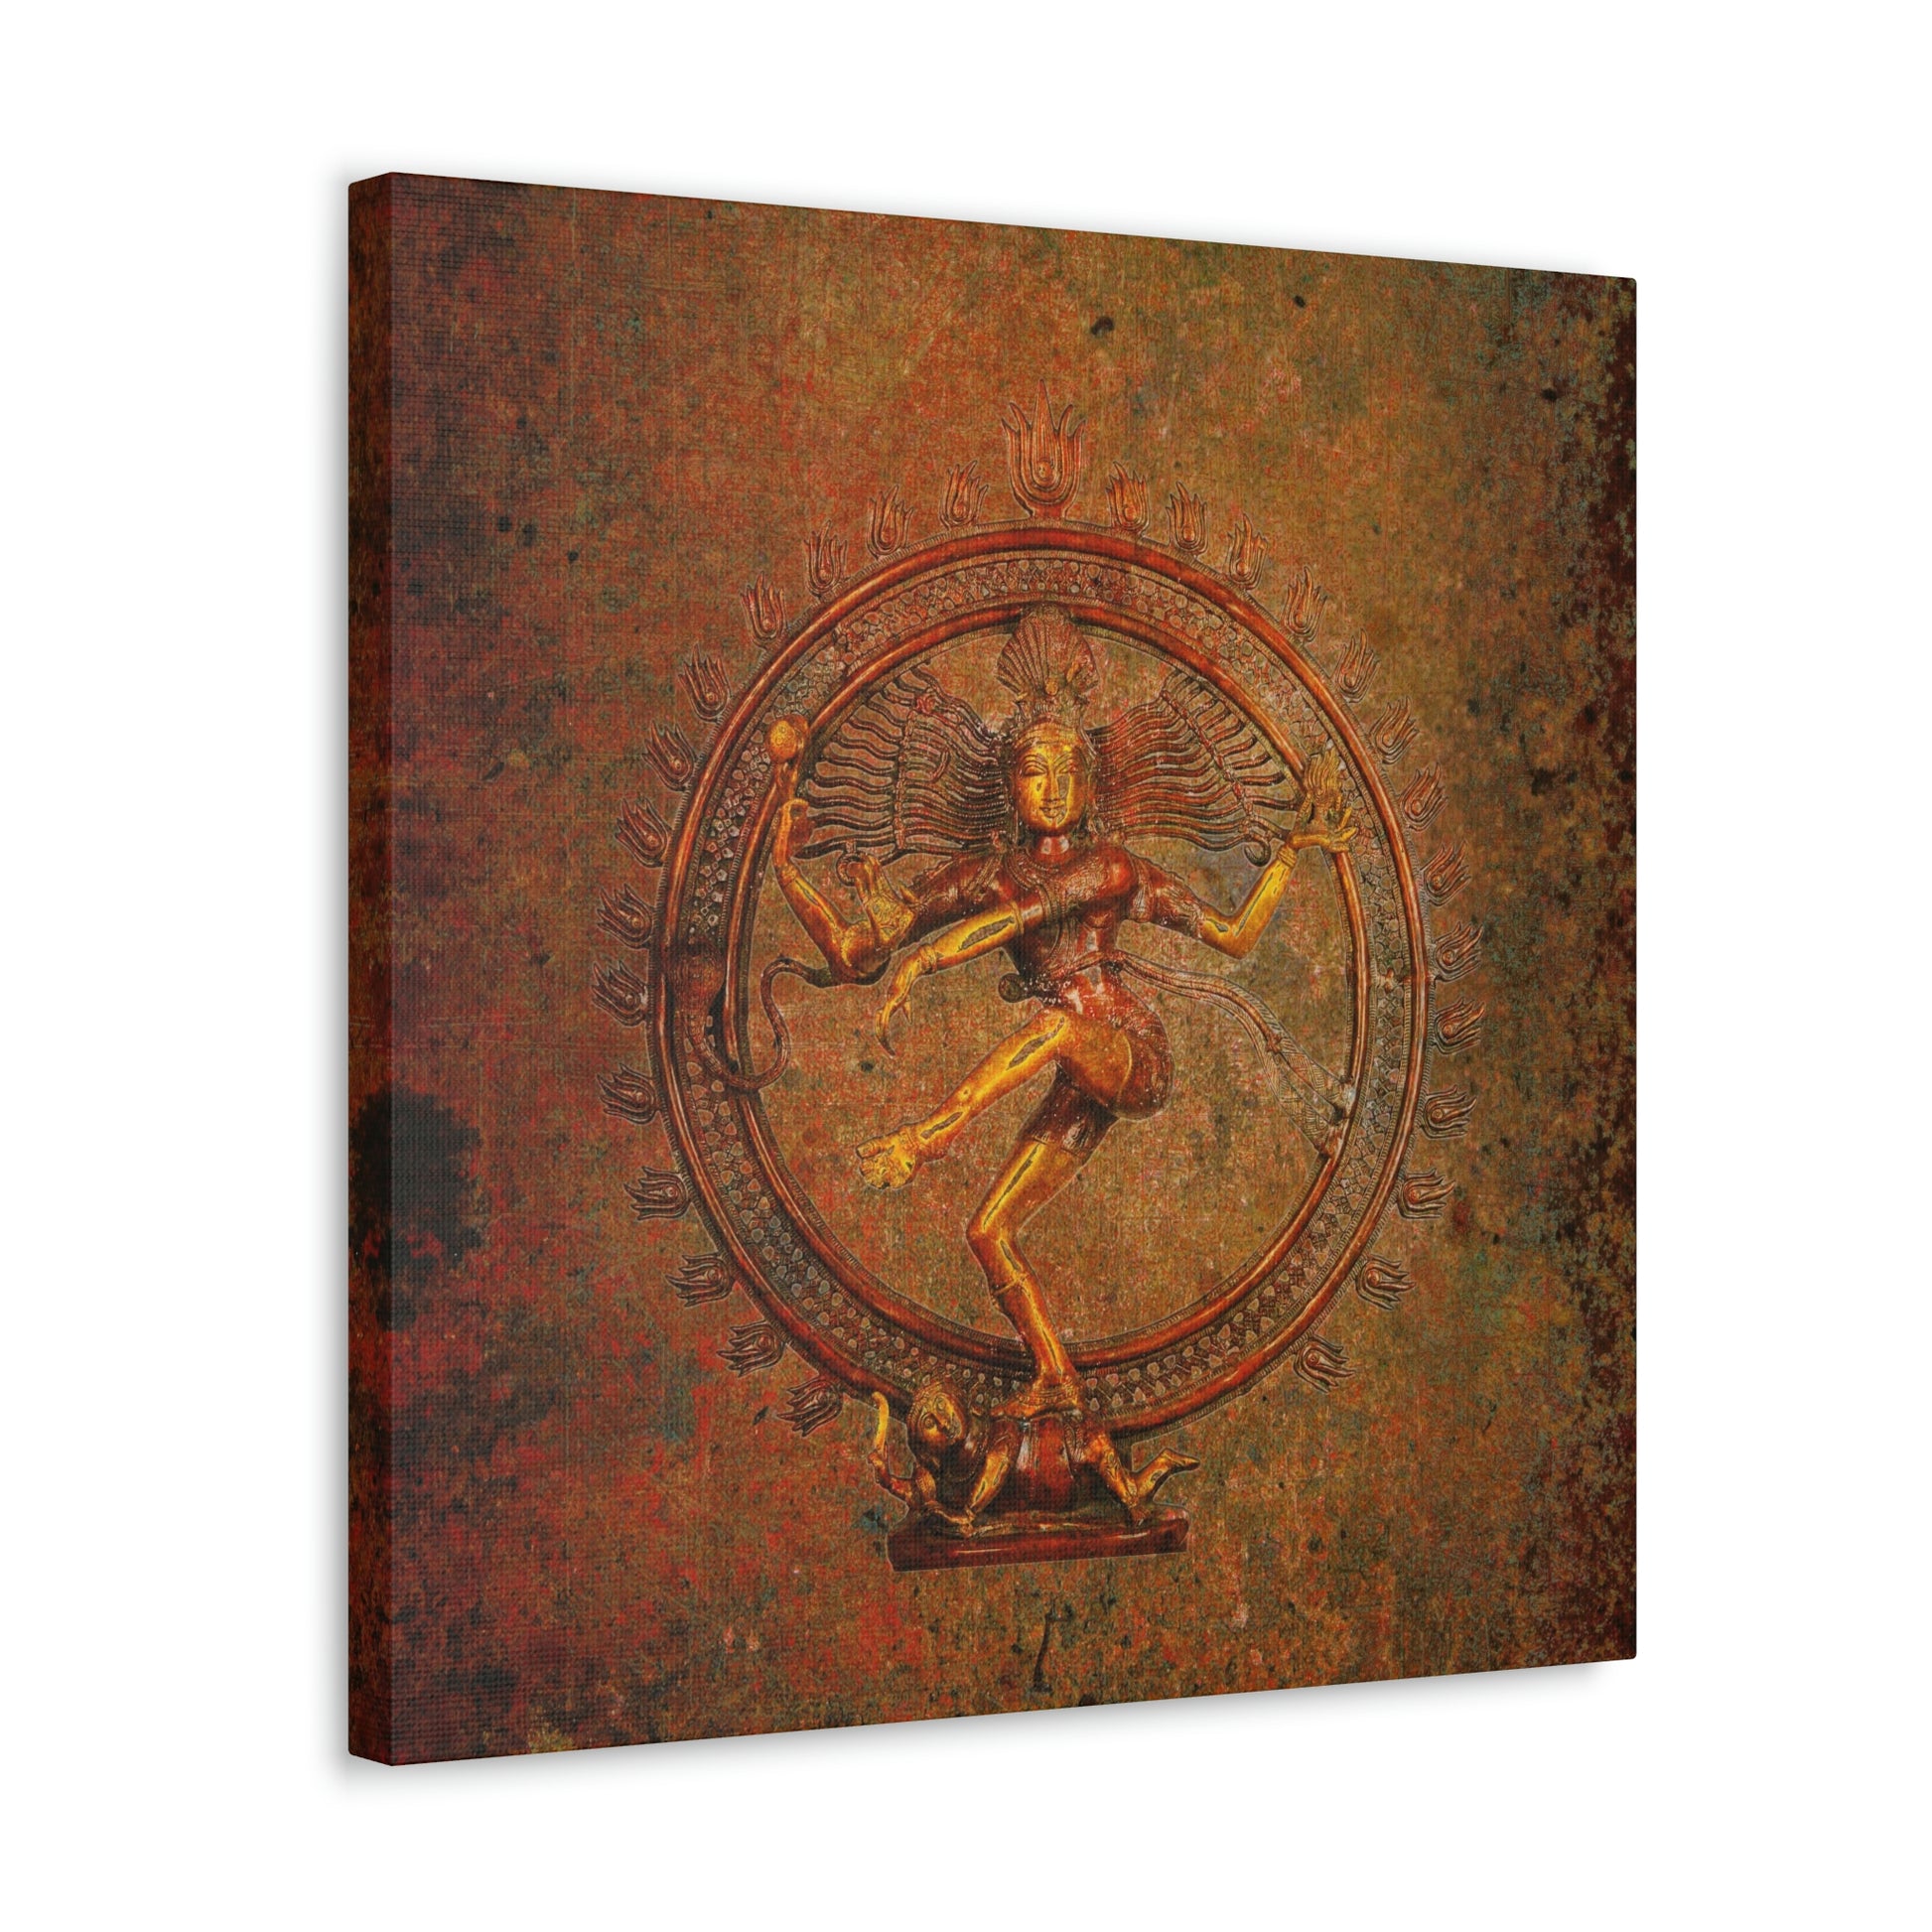 Shiva on a Distressed Background Print on Unframed Stretched Canvas side view